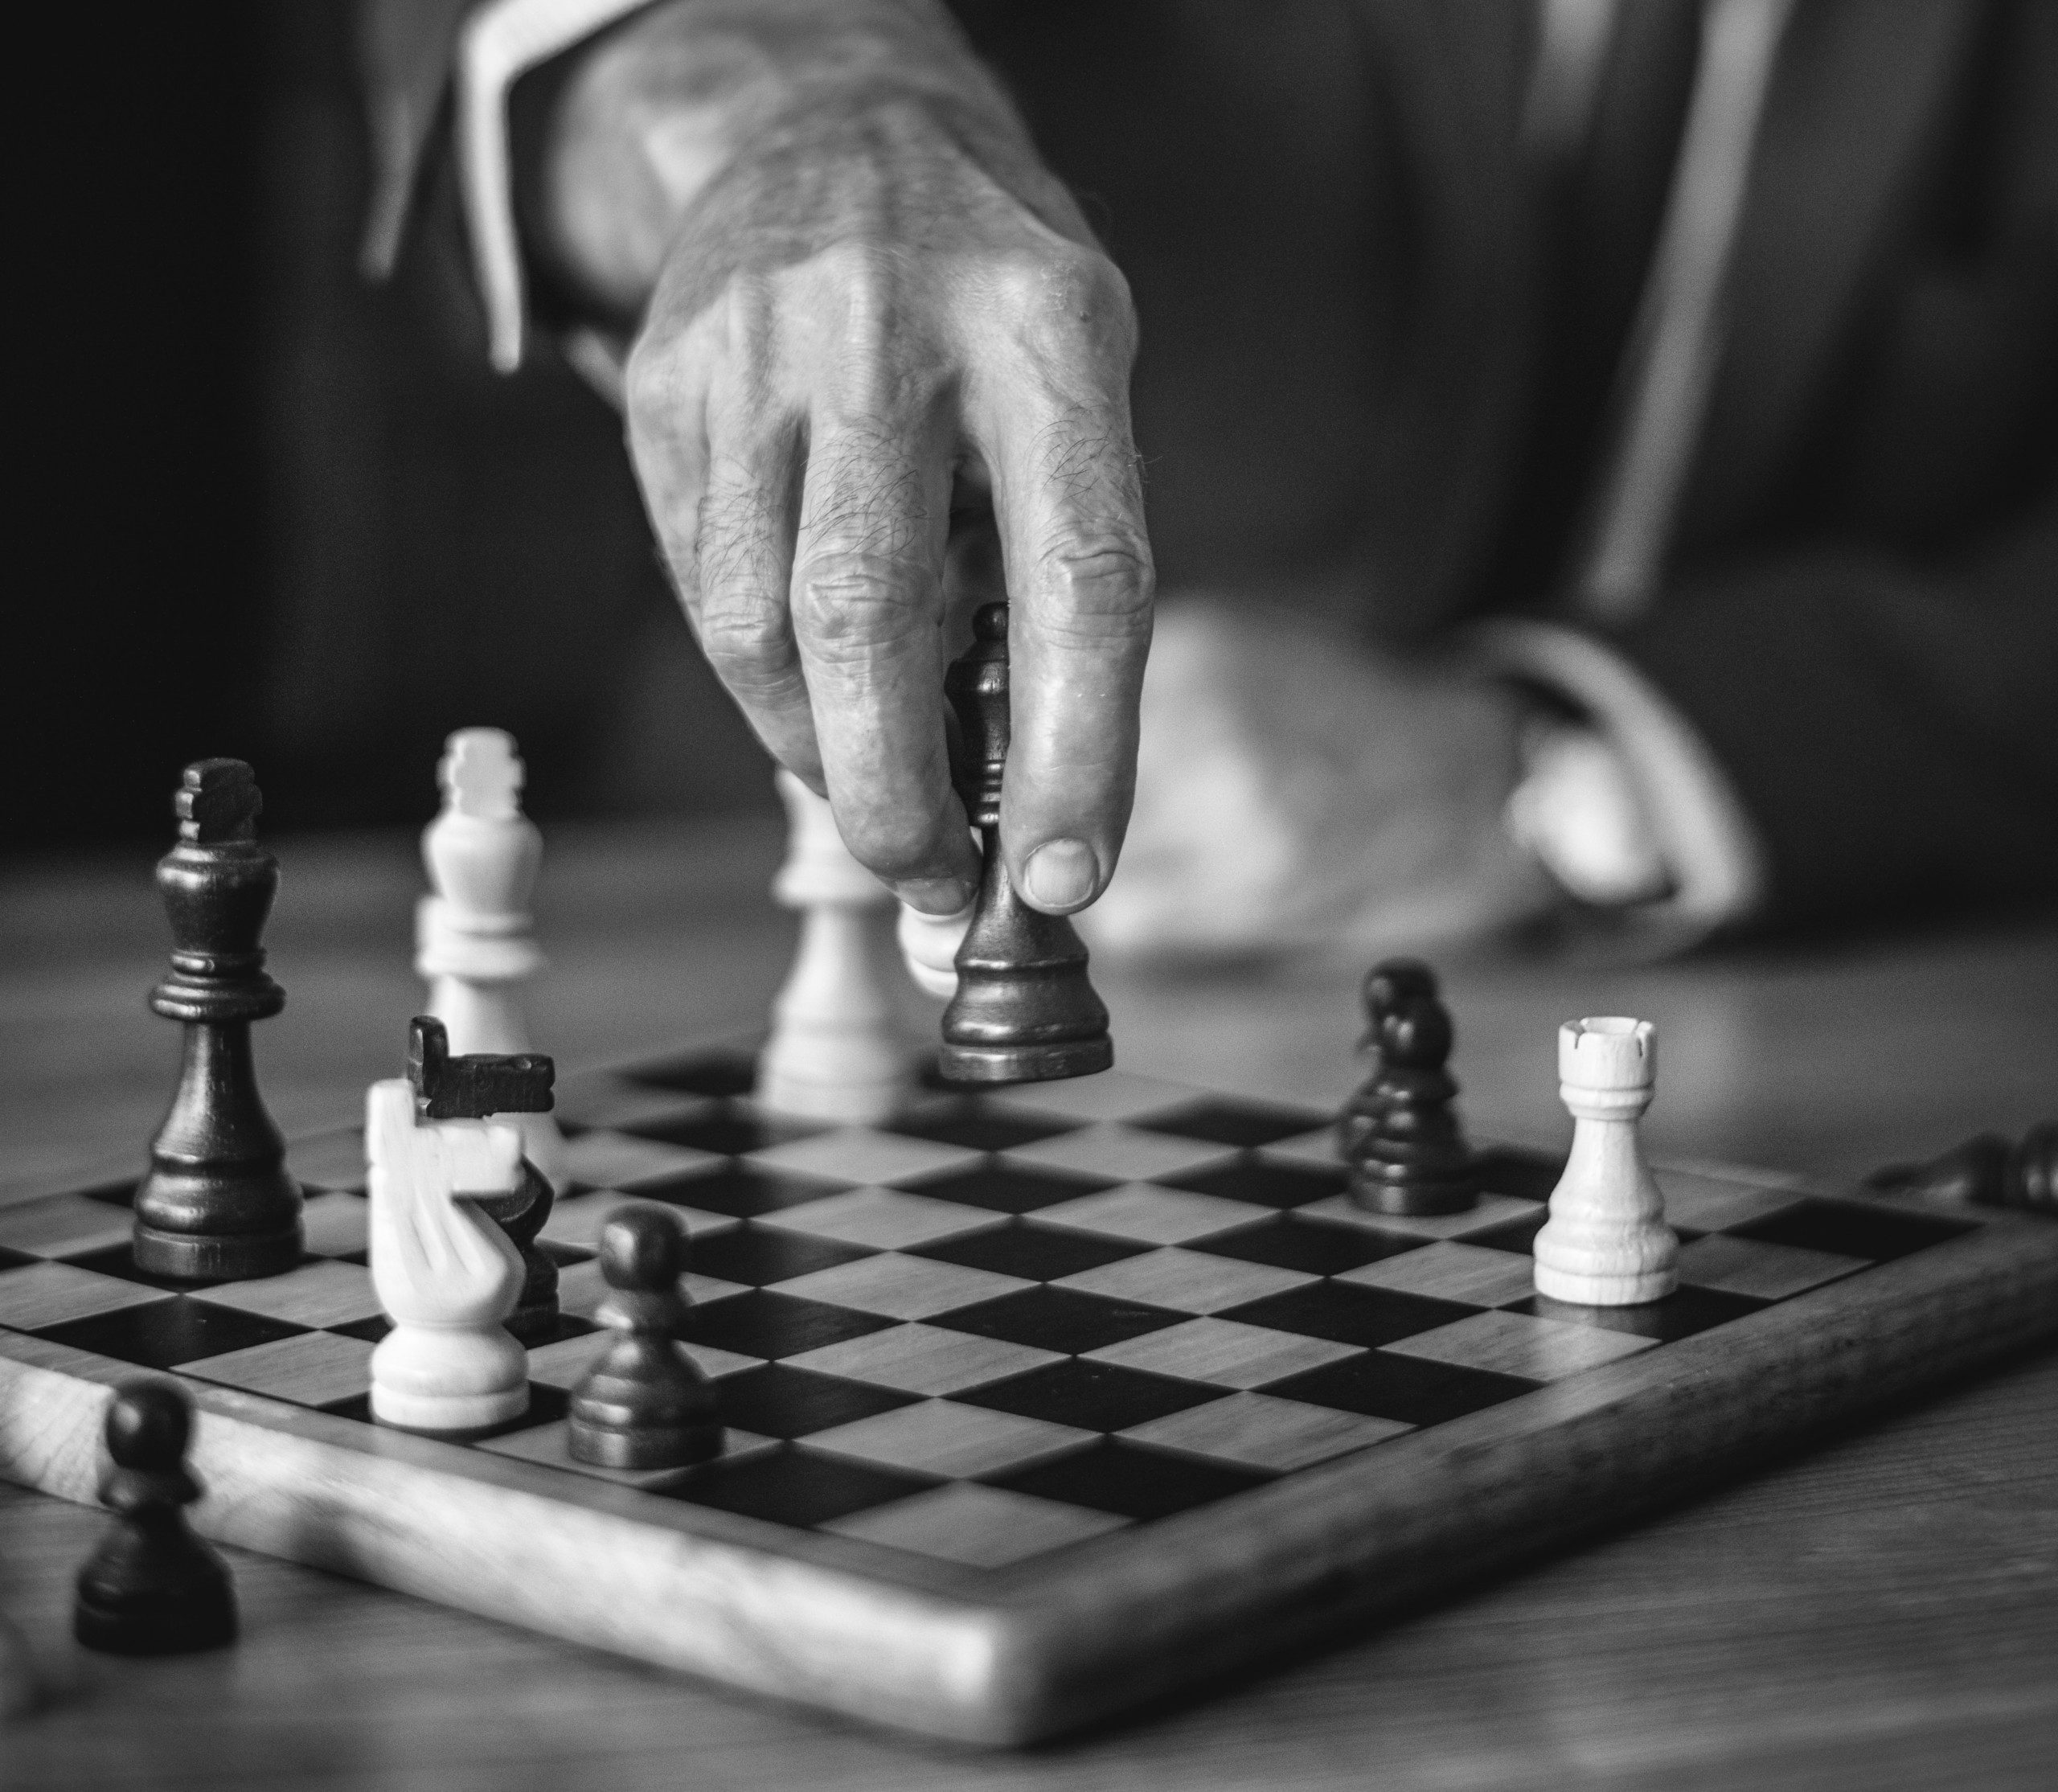 Chess and Project Management - MPUG